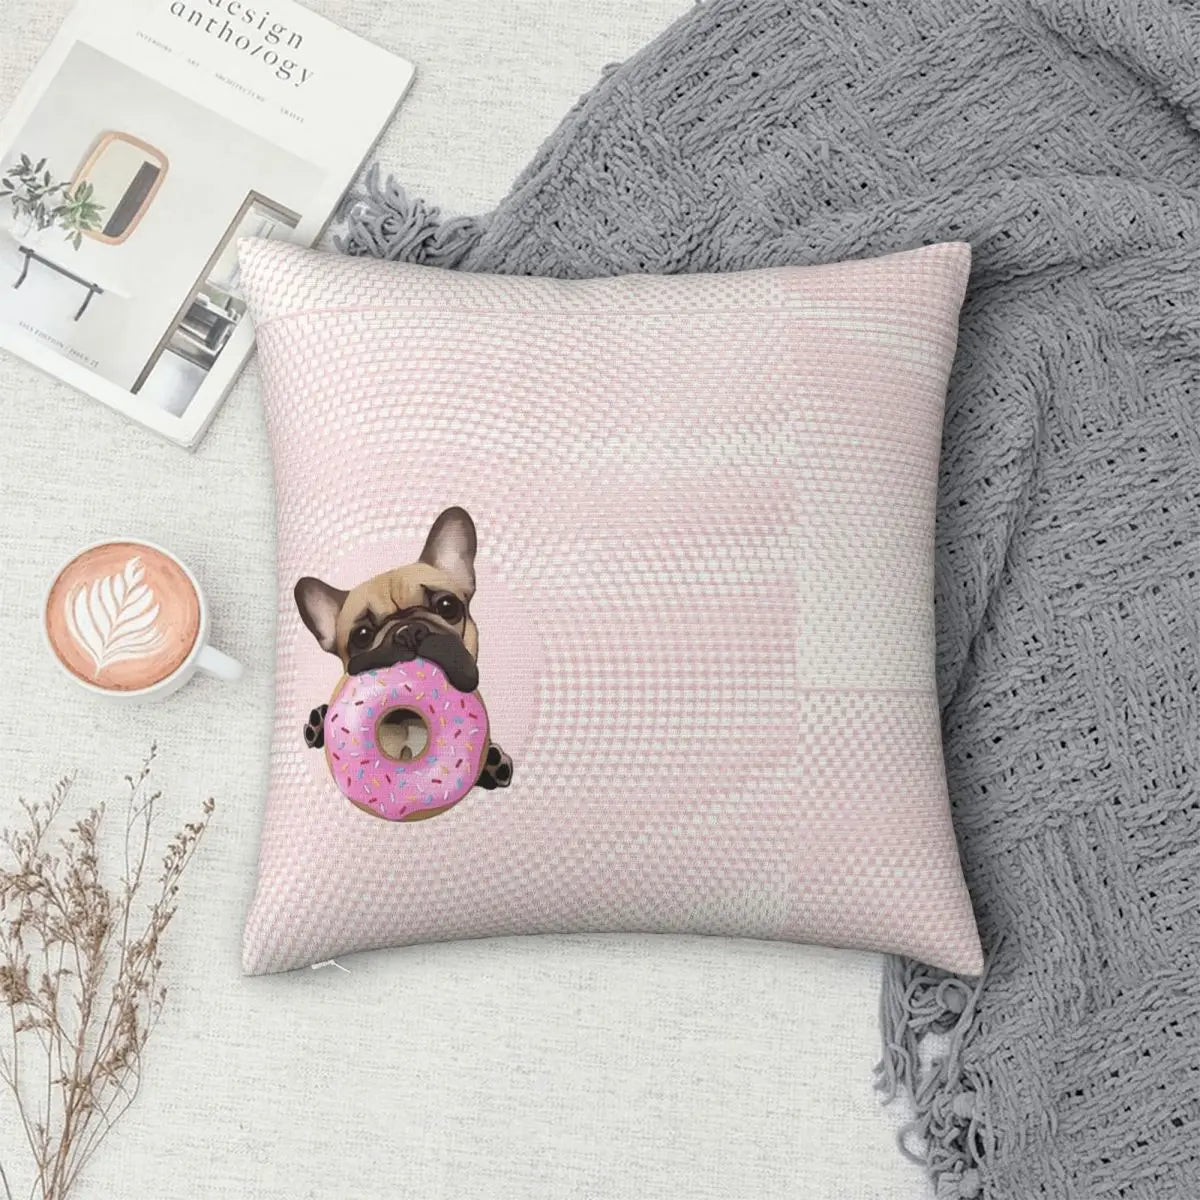 Frenchie and Doughnut Throw Pillow Cover